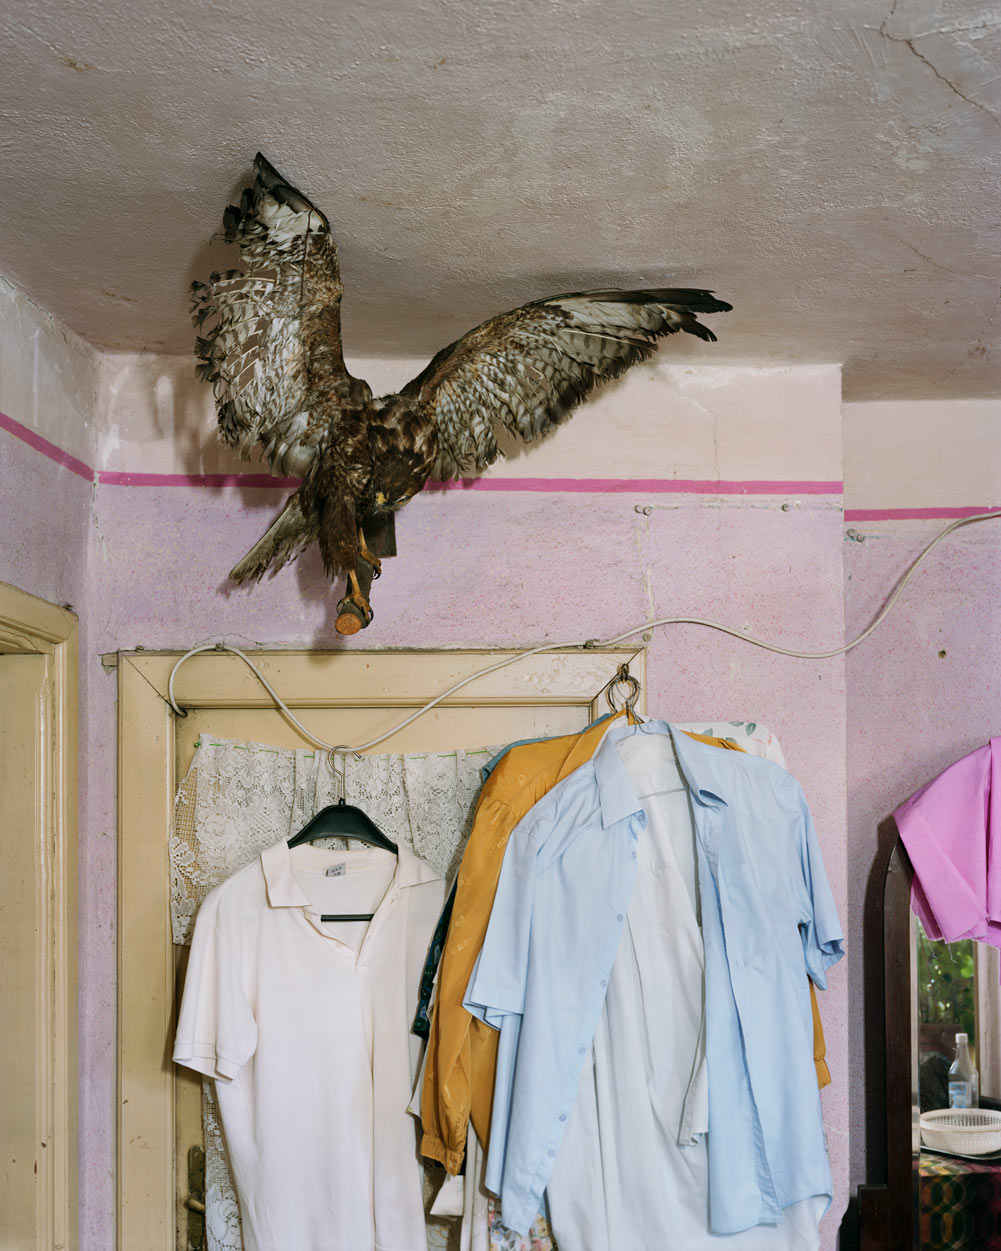 I KNOW HOW FURIOUSLY YOUR HEART IS BEATING · Alec Soth